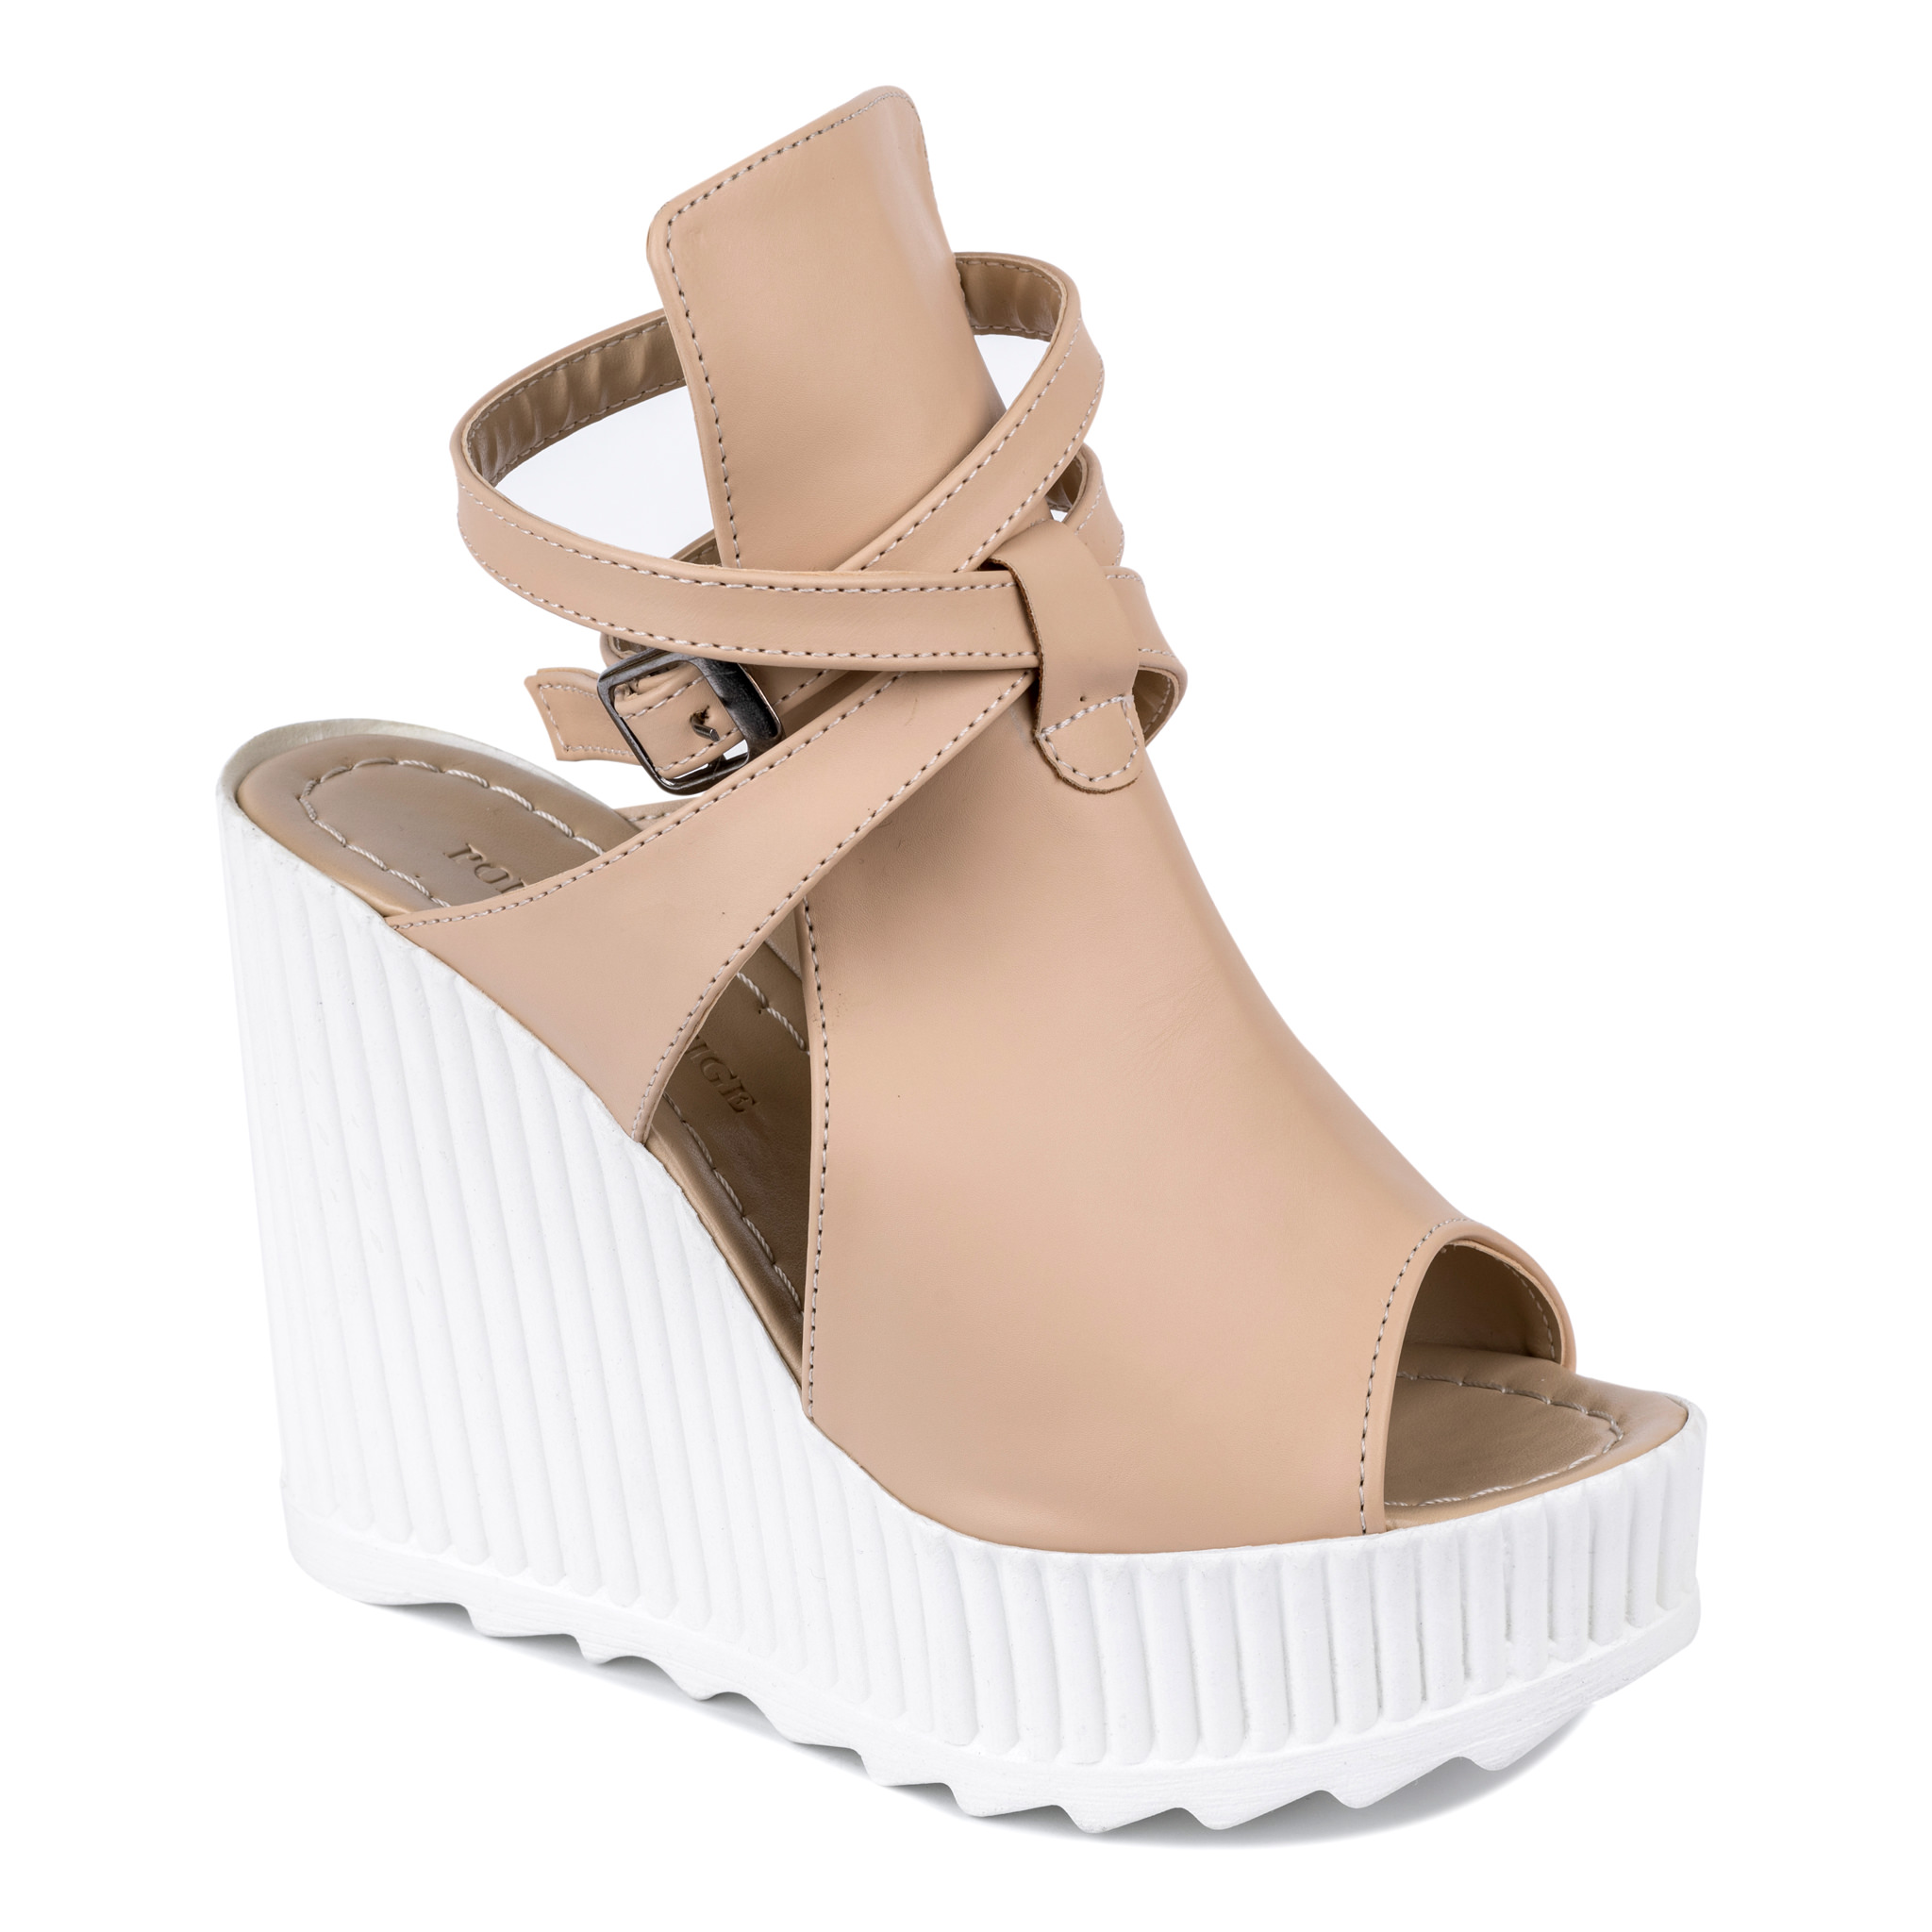 WEDGE SANDALS WITH BELTS - BEIGE